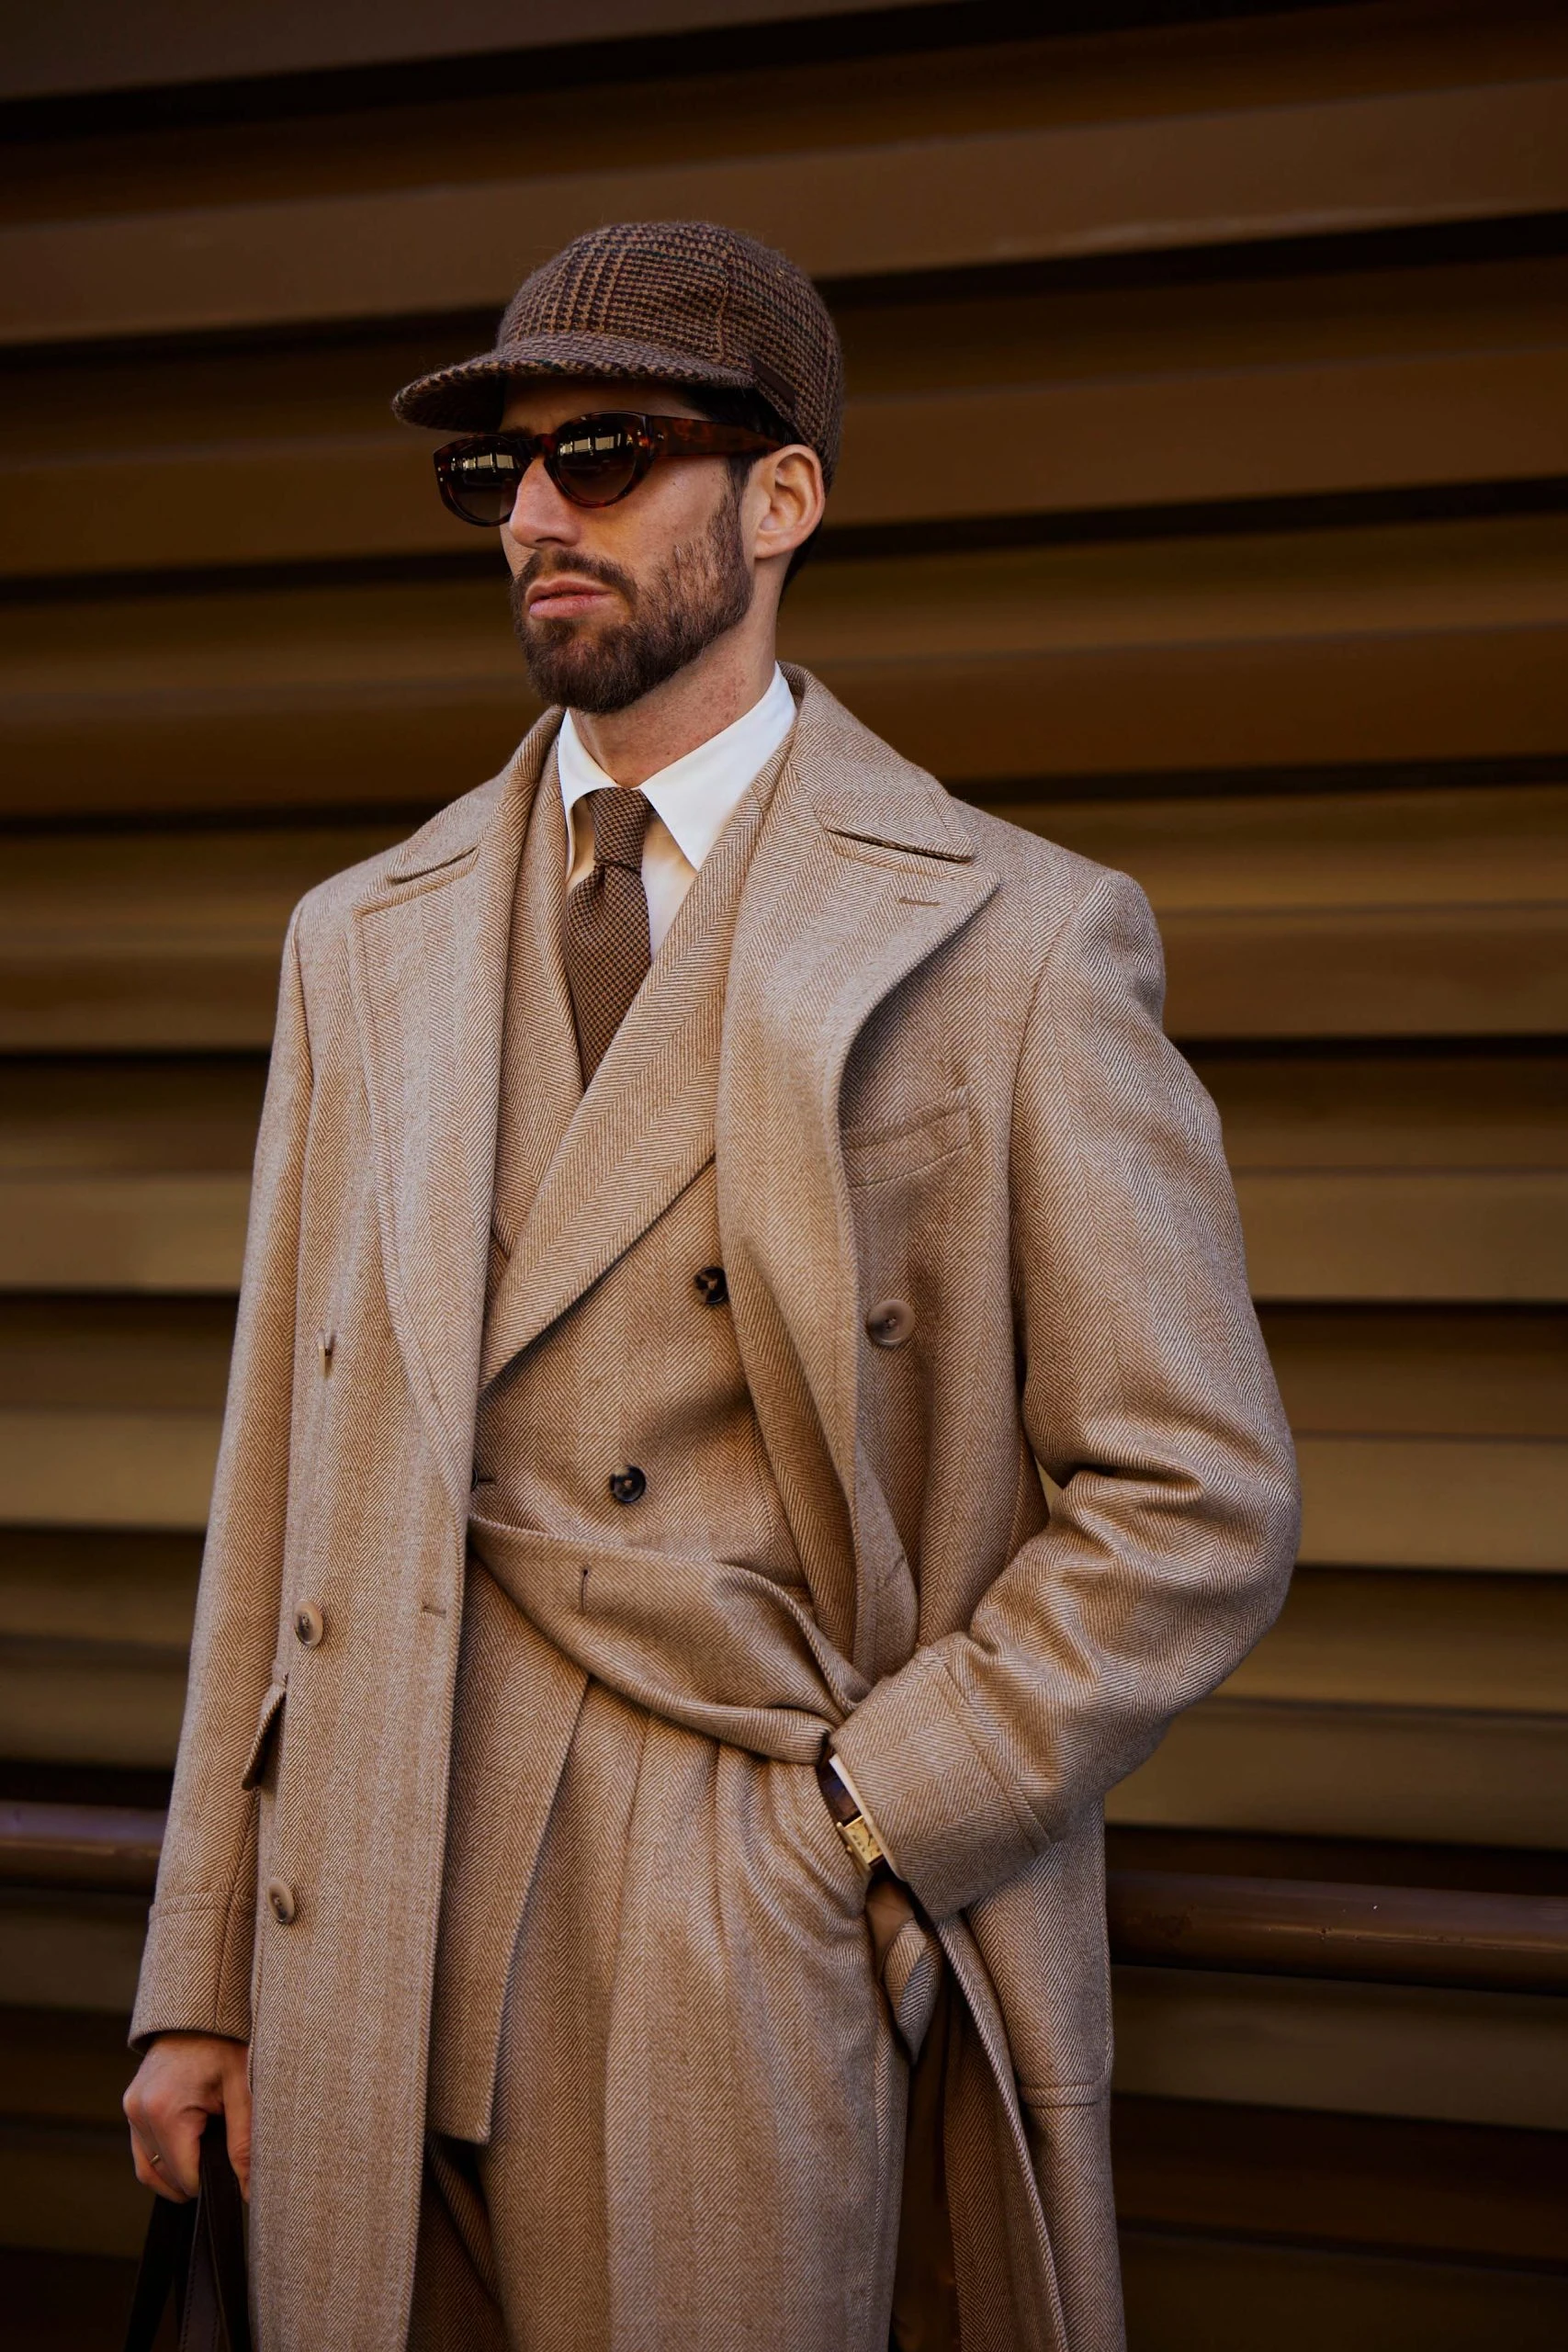 carlos domord at pitti uomo wearing a custom made beige herringbone mond suit and overcoat